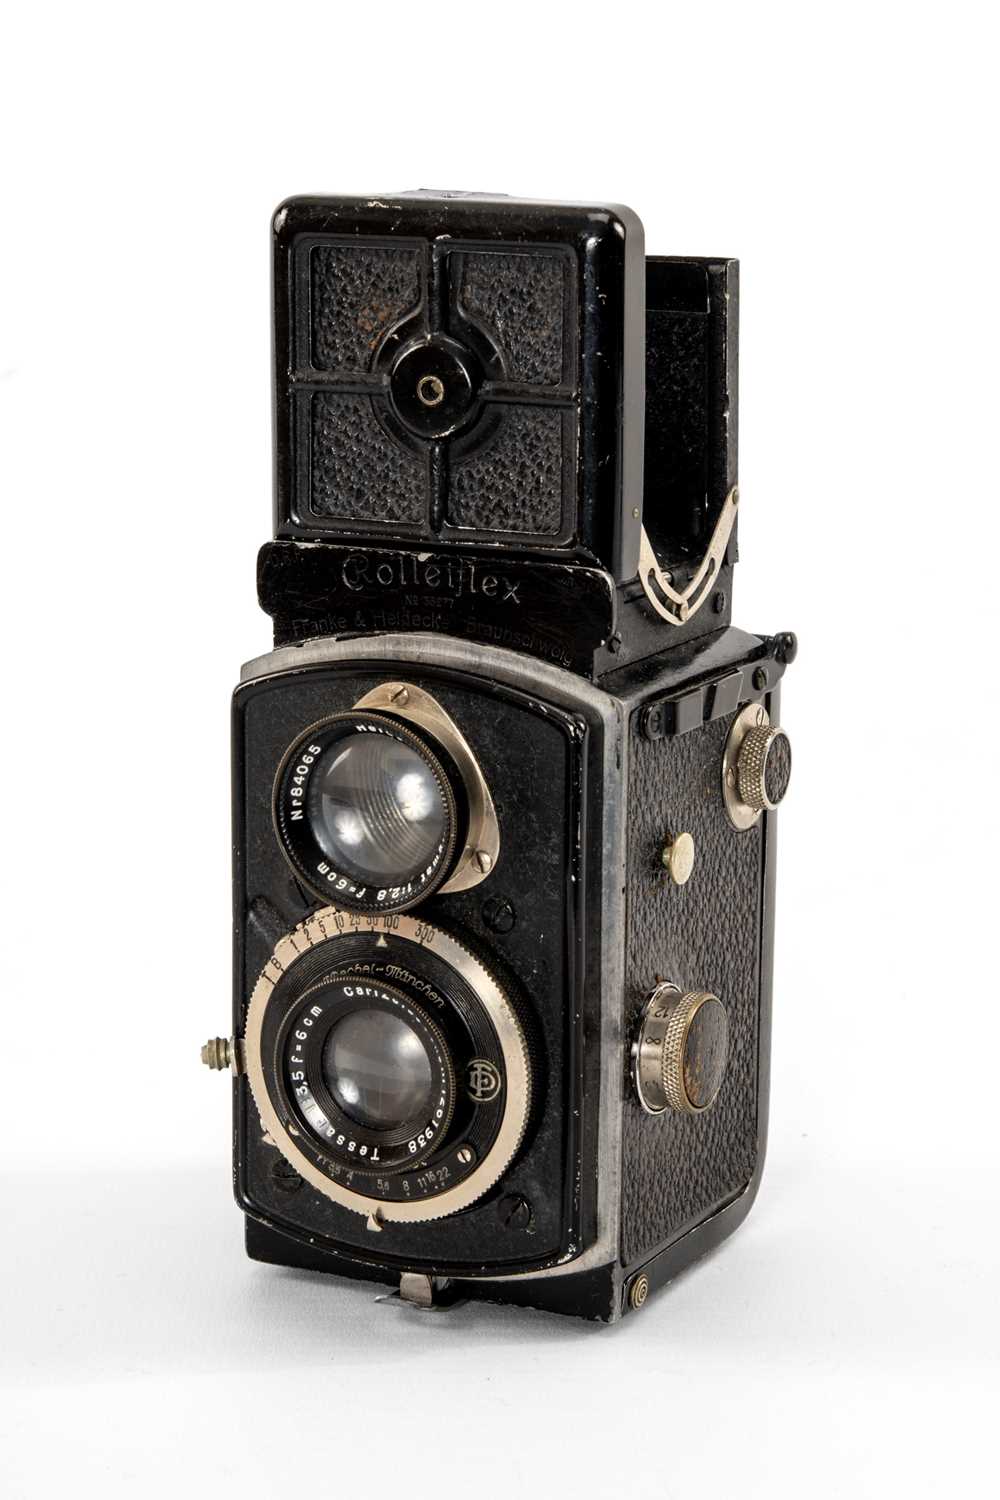 A BABY ROLLEIFLEX 3.5F TLR CAMERA - black, serial no. 133277, with a Carl Zeiss Jena Tessar f/3.5 - Image 2 of 2